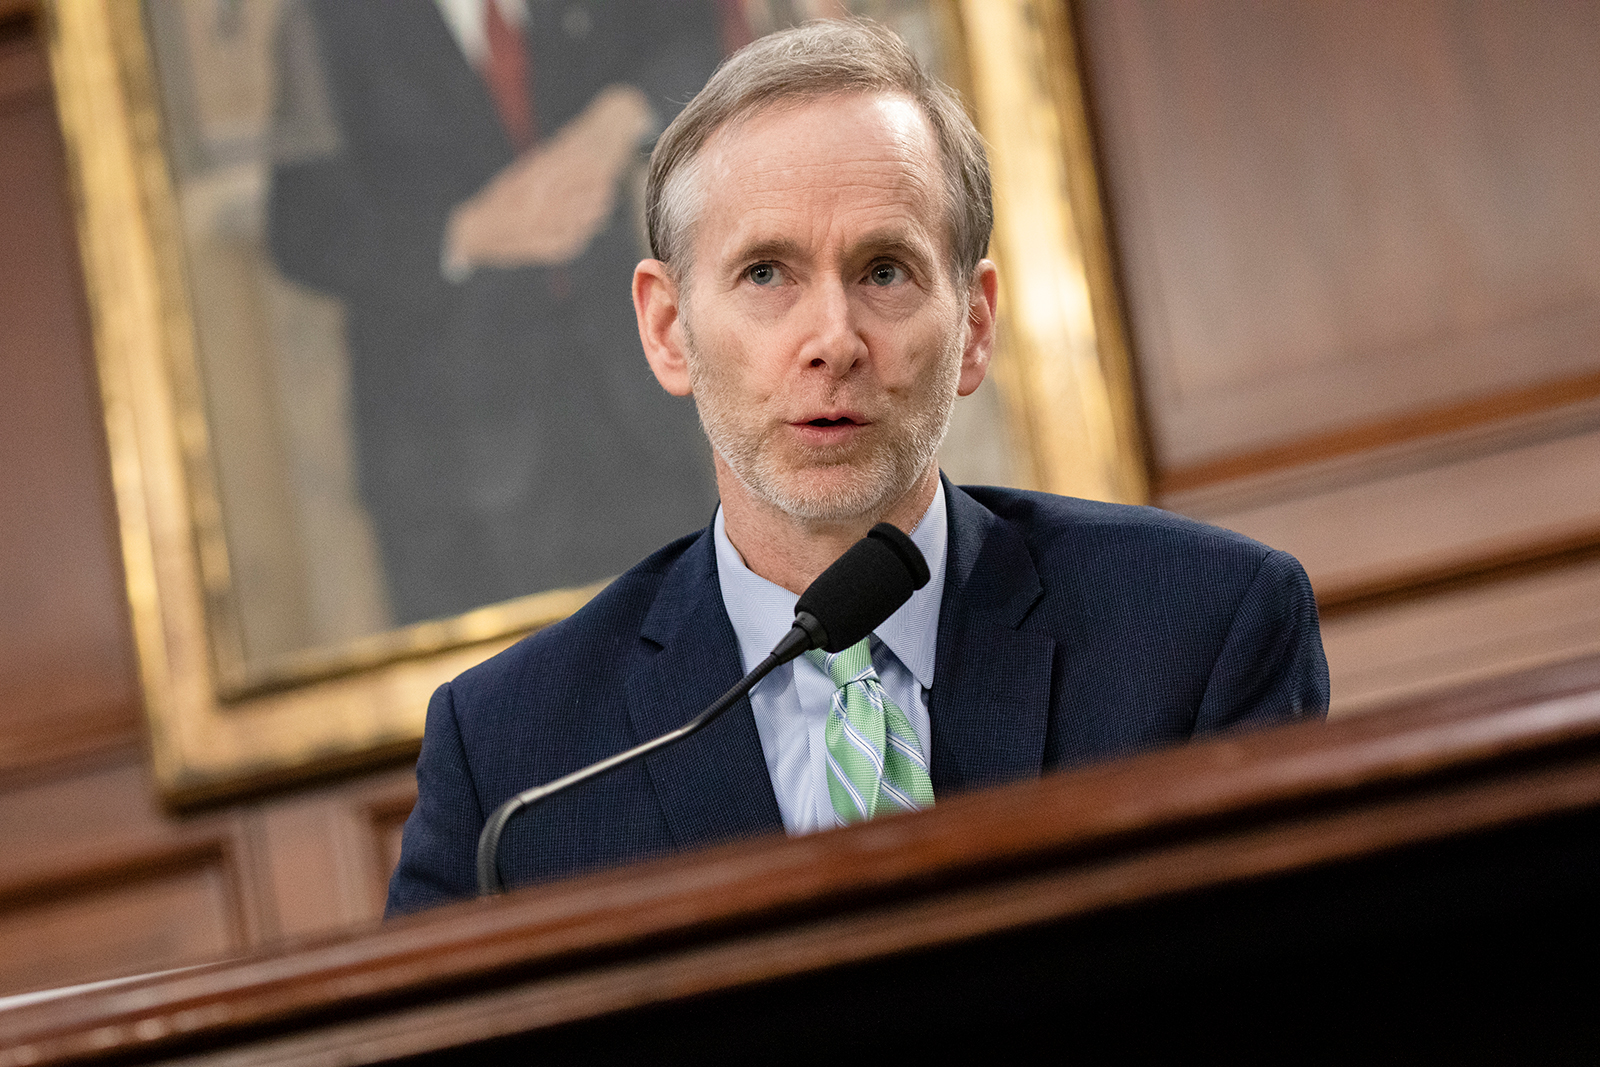 Dr. Tom Inglesby, the director of the Bloomberg School’s Center for Health Security, speaks during a briefing Covid-19 developments on Capitol Hill in Washington, on March 6. 